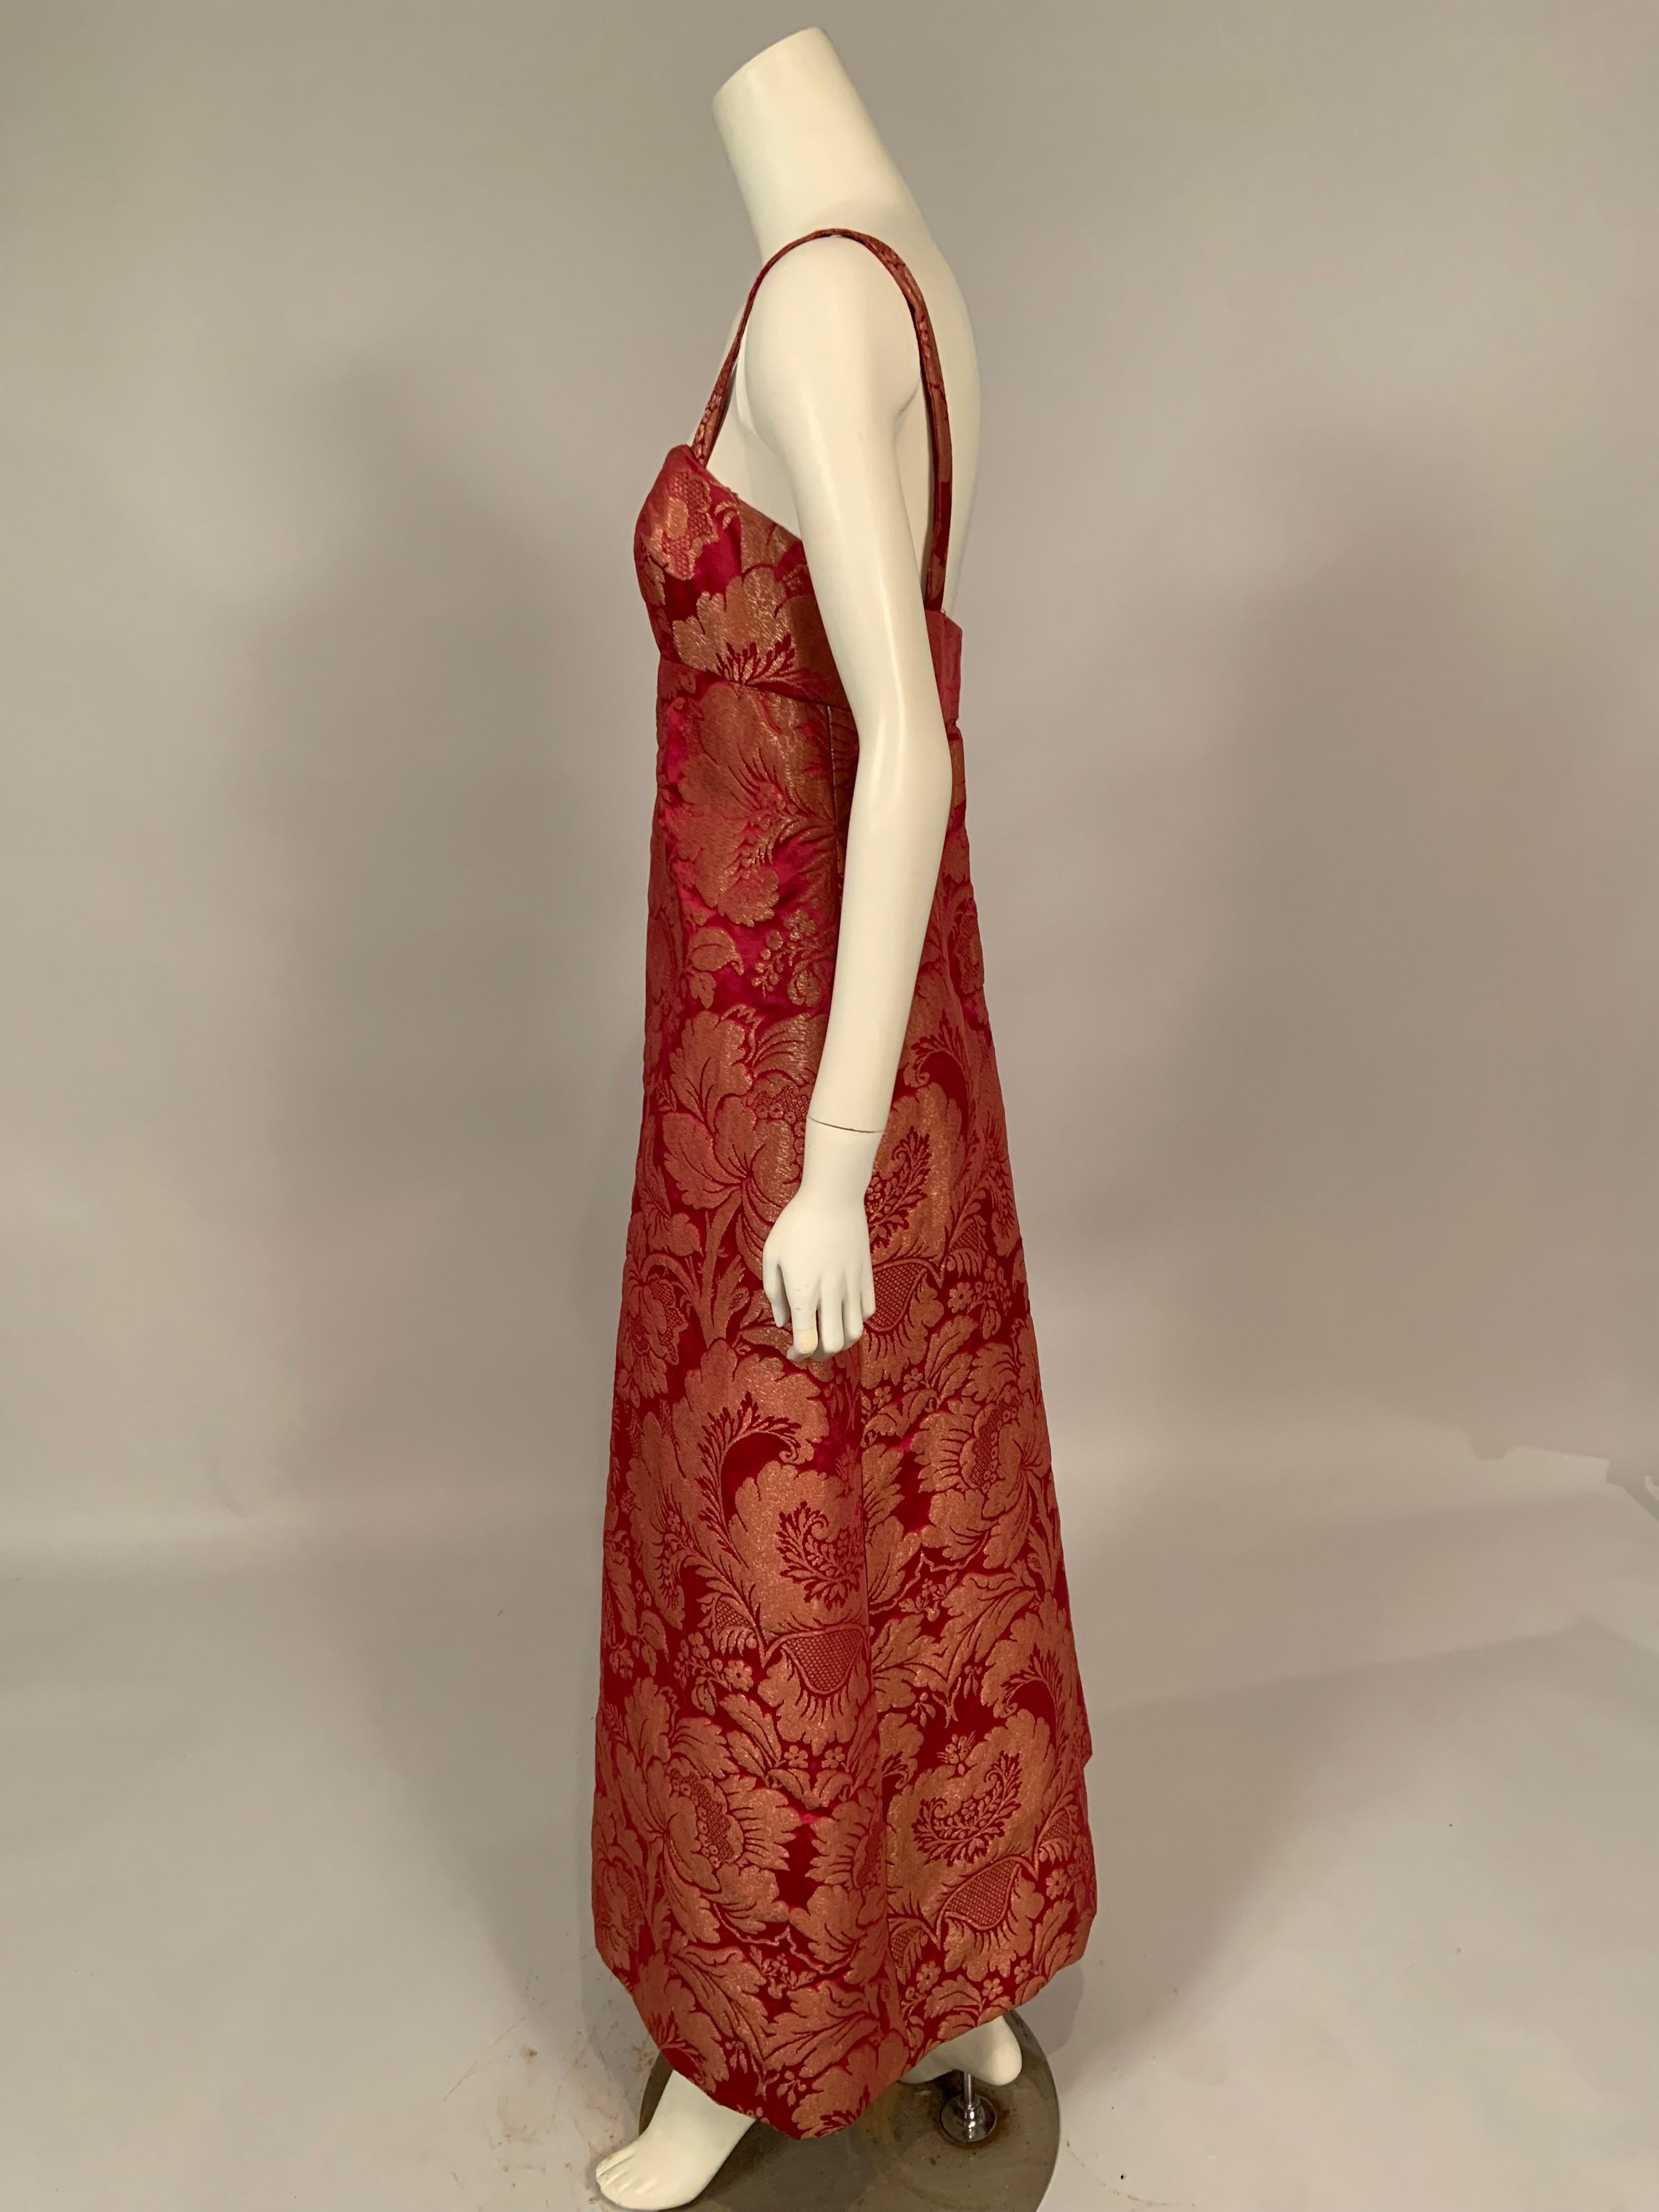 Women's 1960's Helena Barbieri Raspberry Red and Woven Metallic Gold Dress and Coat For Sale